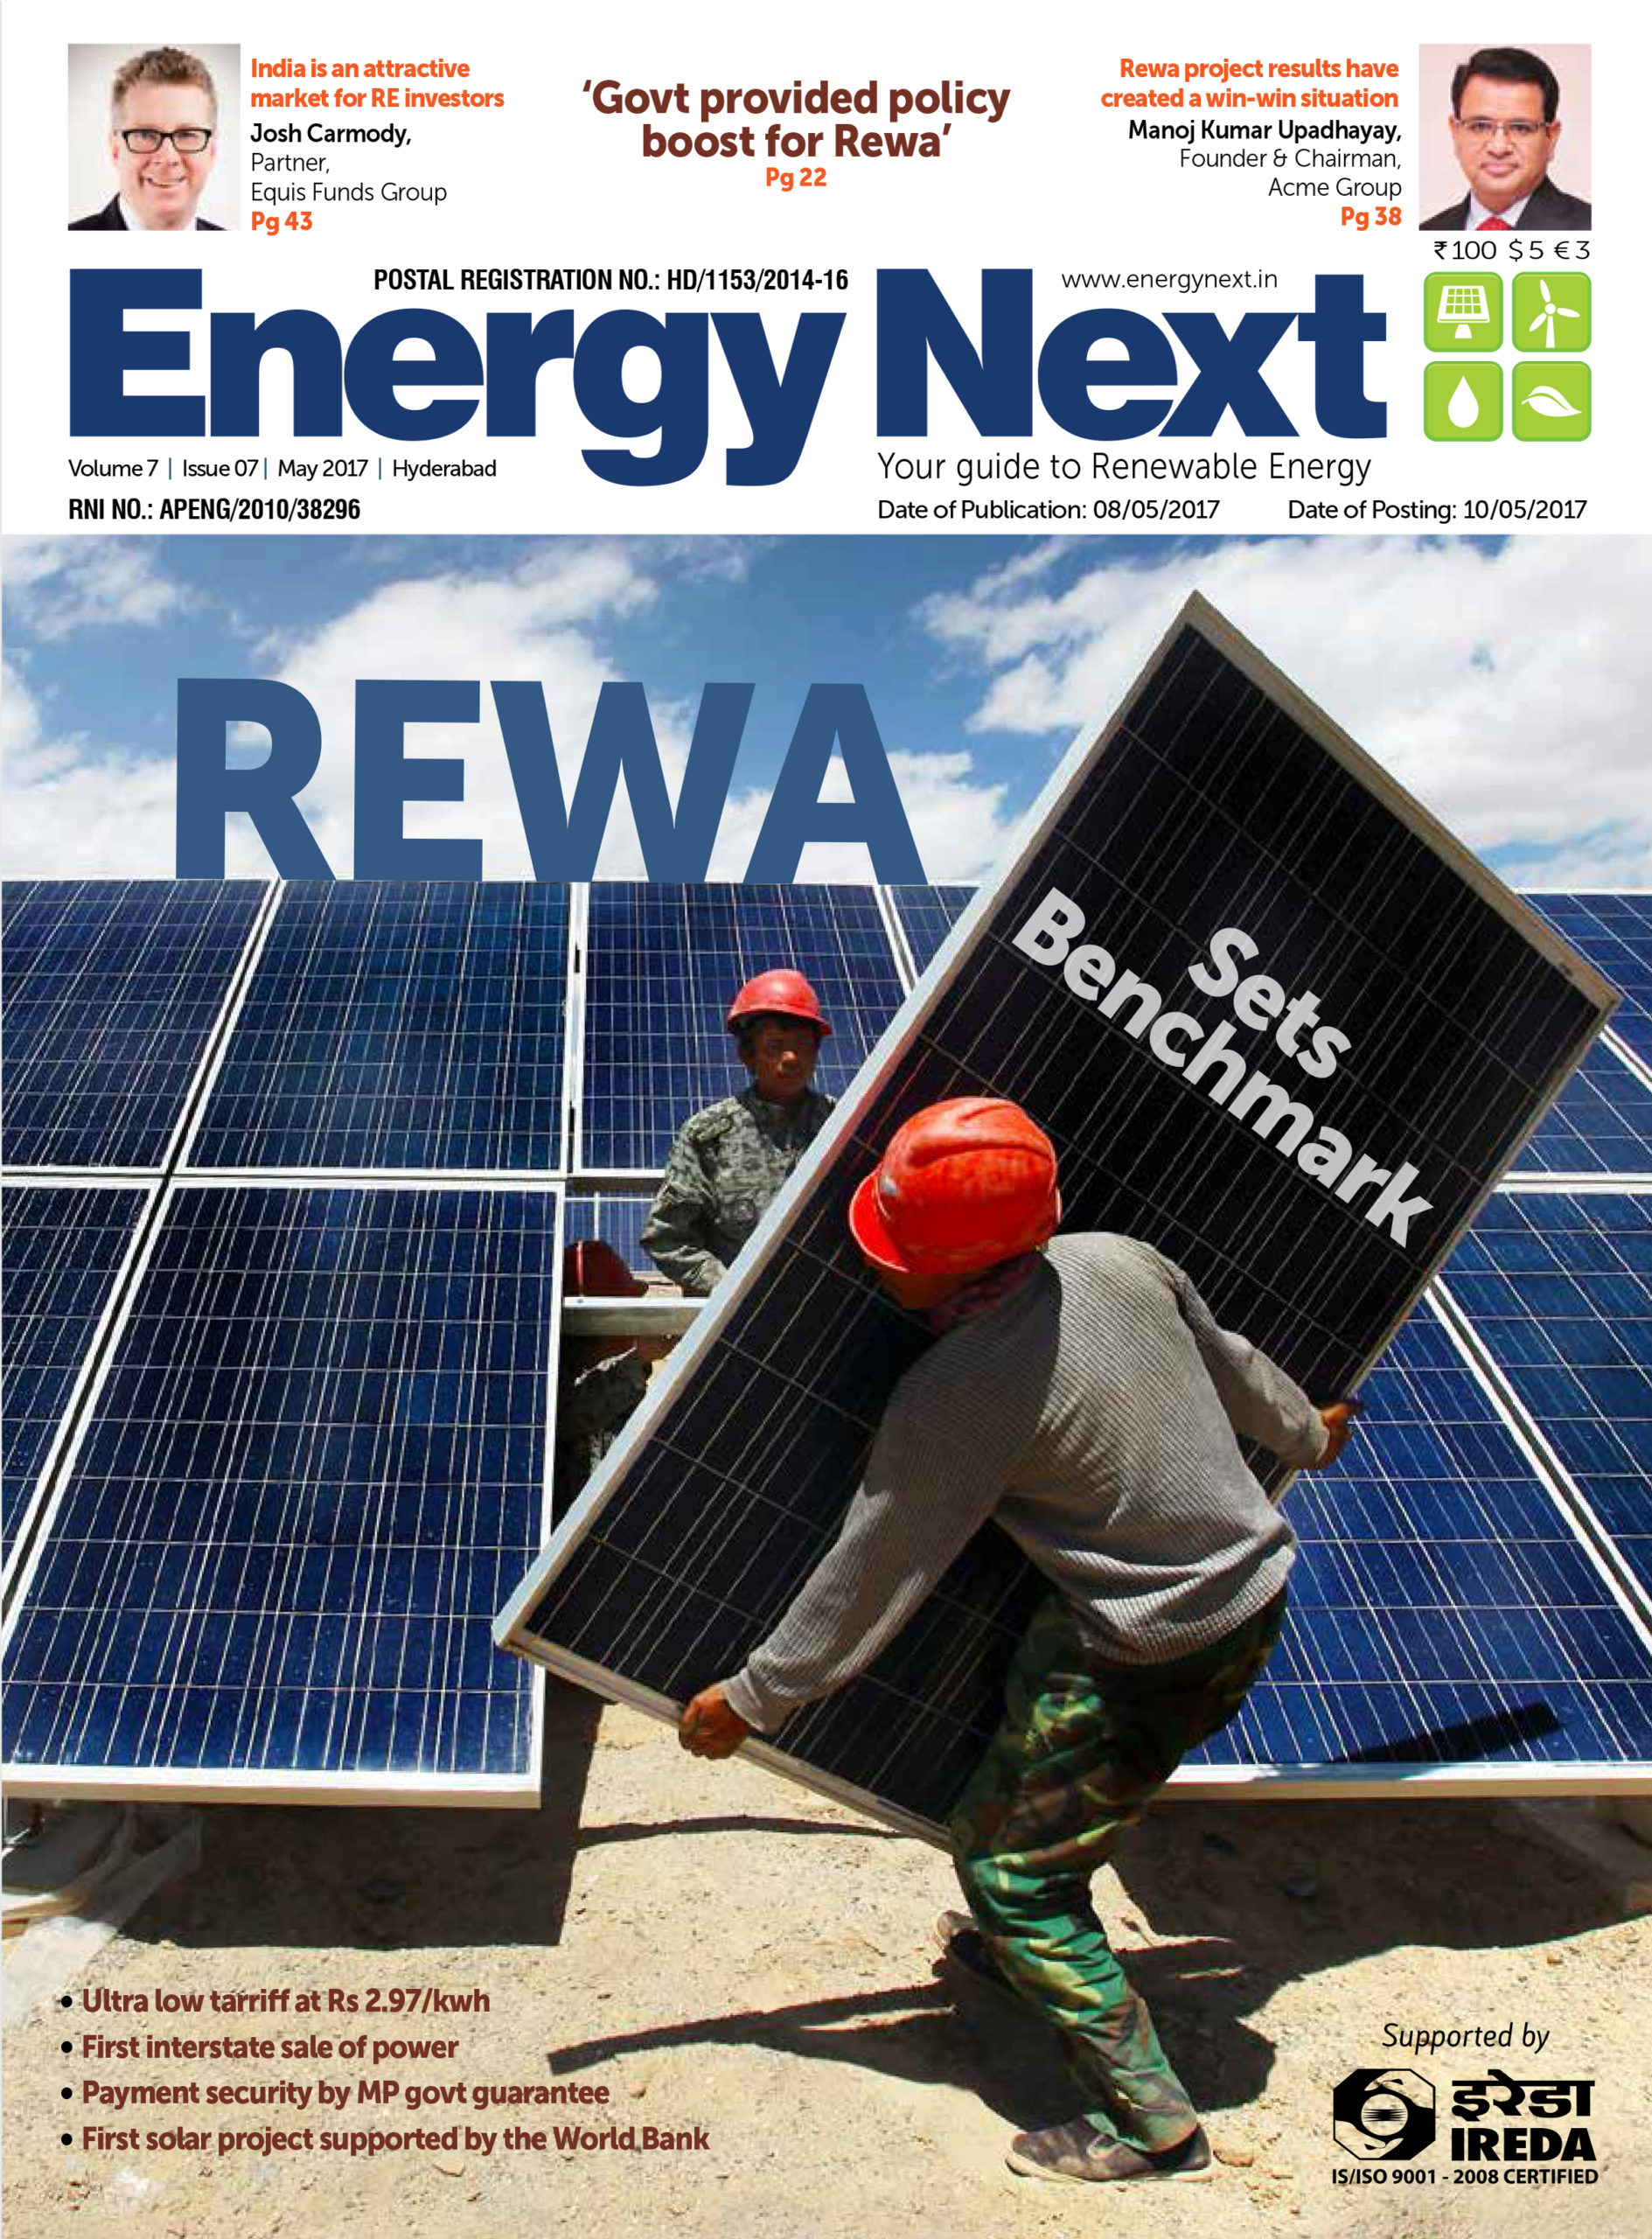 EnergyNext volume 7 issue 7 May 2017 scaled